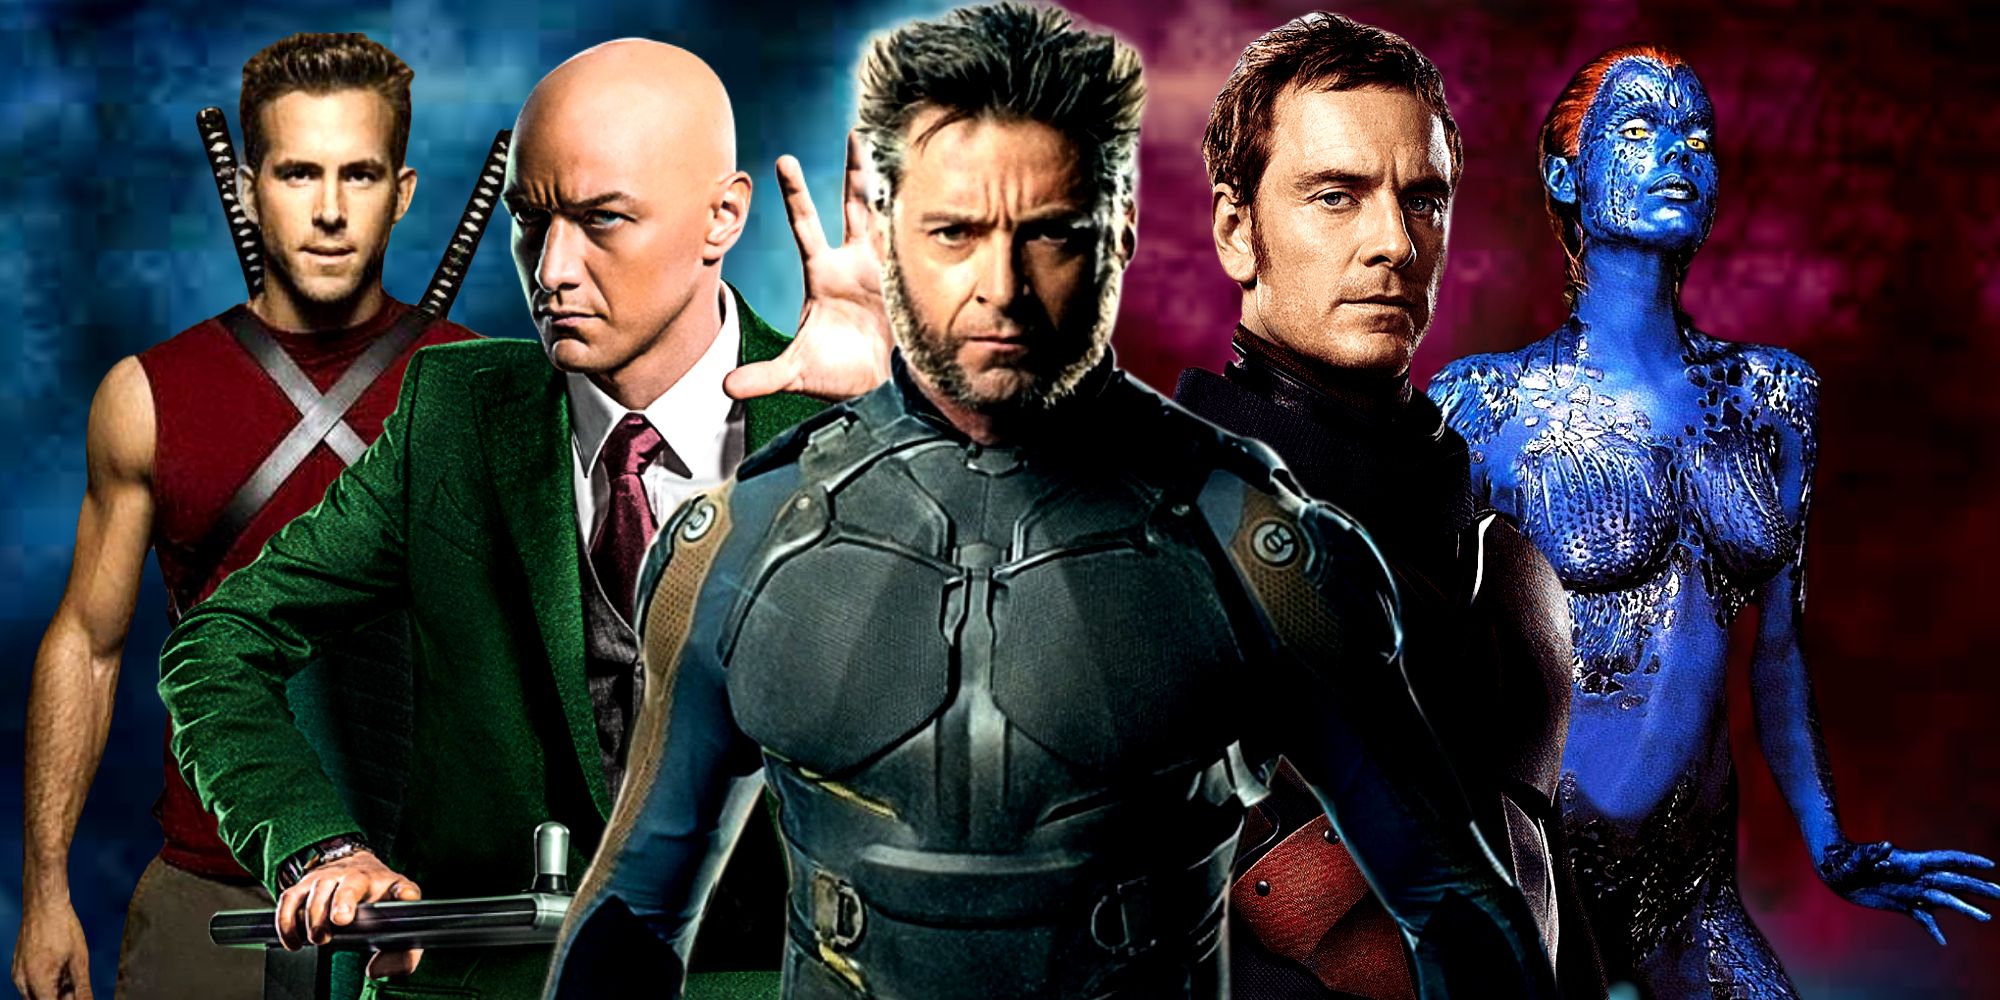 Wolverine Stands in front of Professor X, Magneto, Mystique, and Wade Wilson in the X-Men Movies